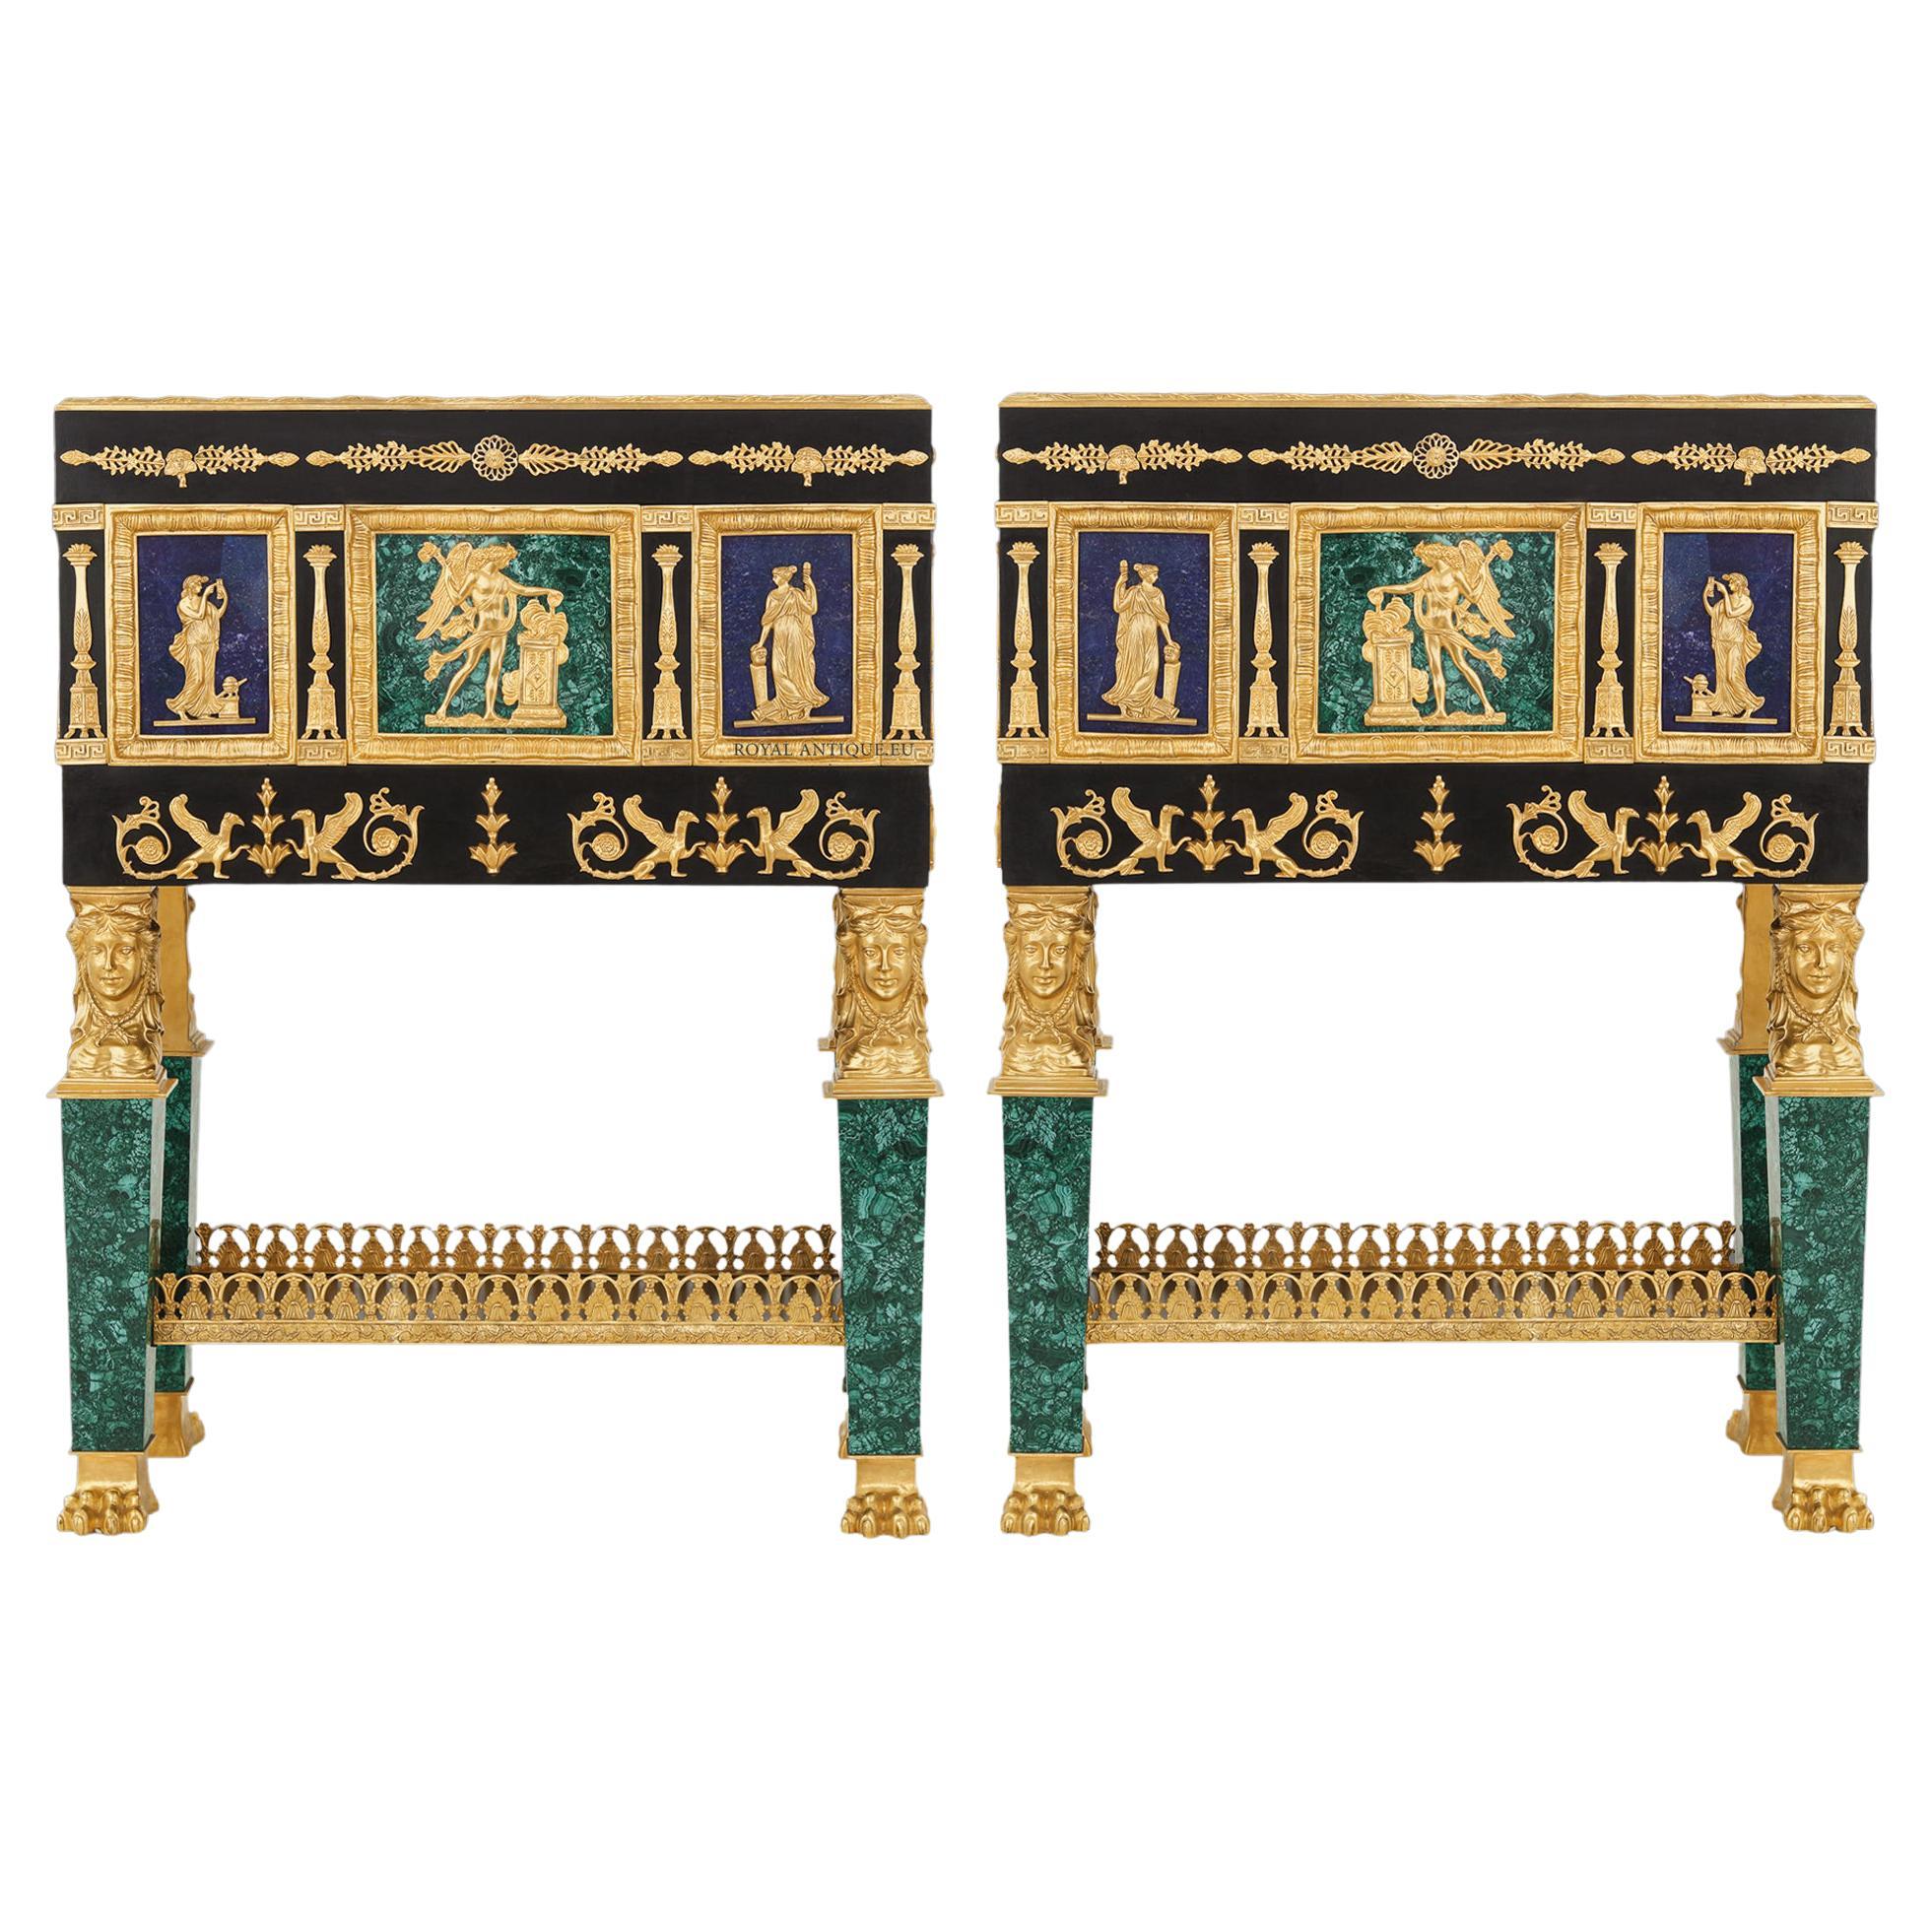 Pair of Planter Made of Malachite and Lapis For Sale at 1stDibs